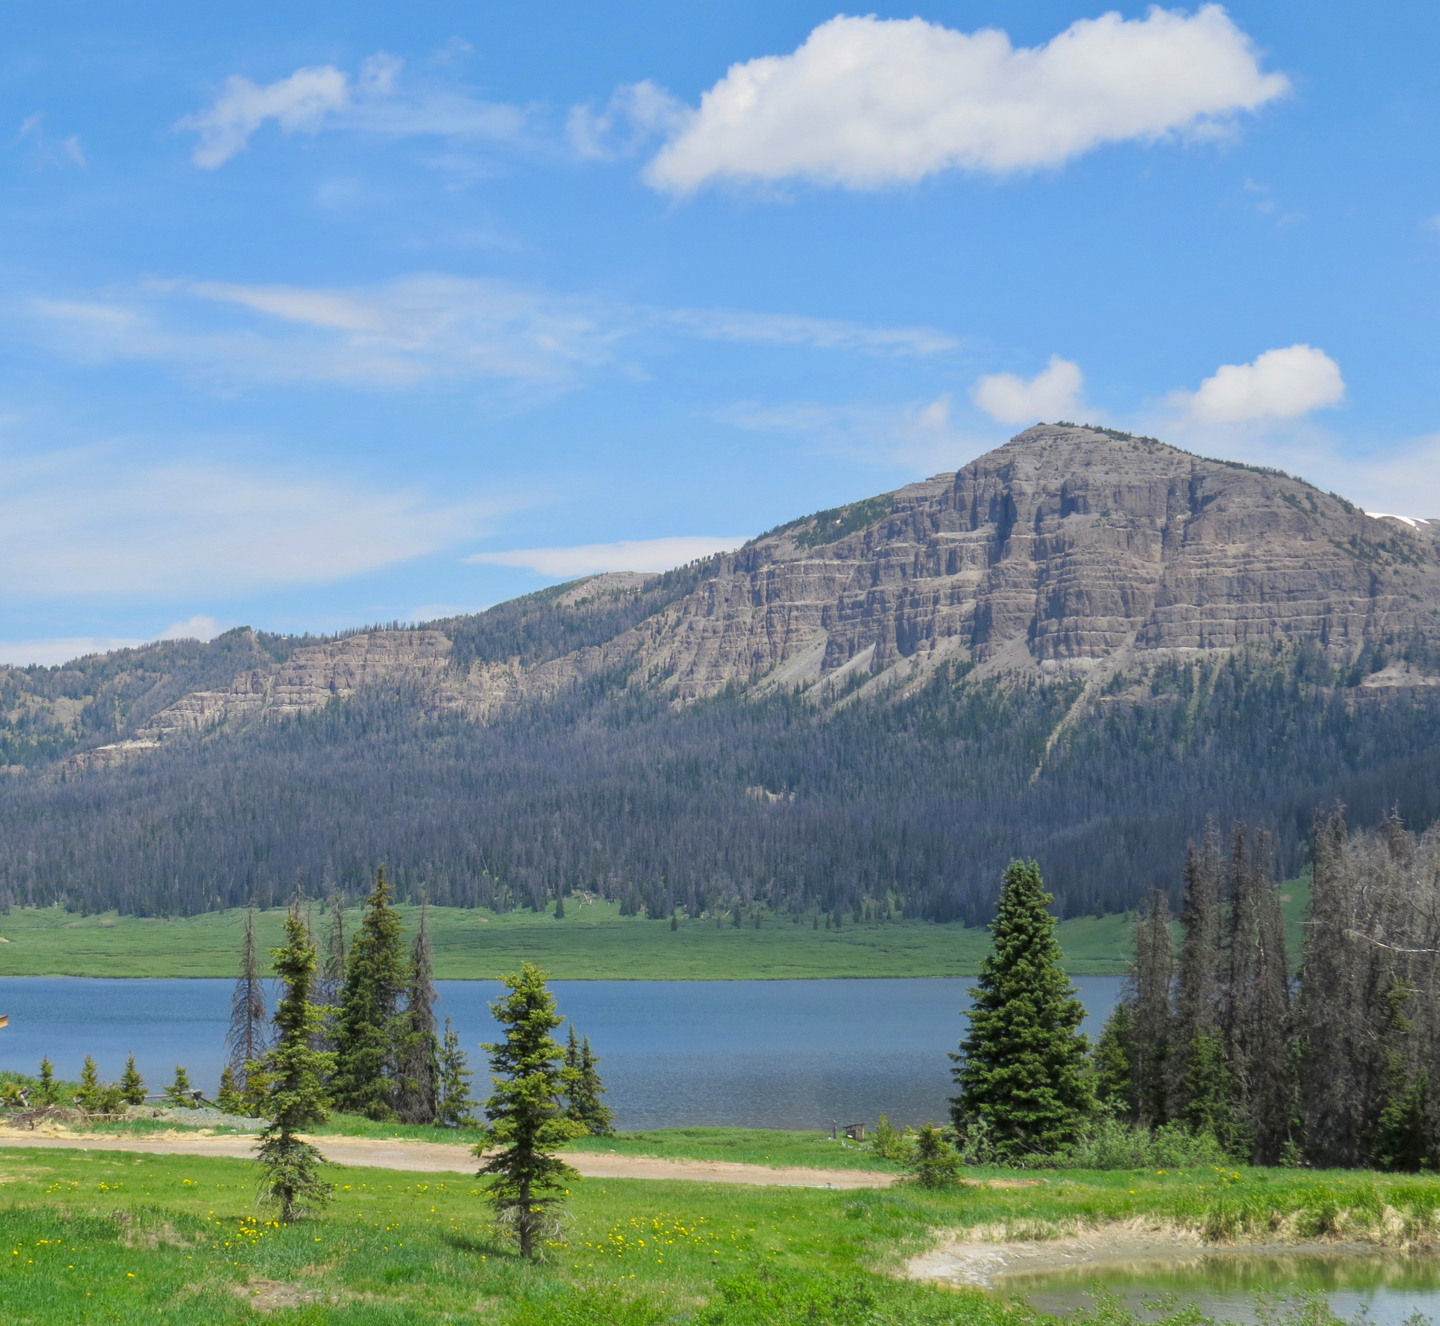 Brooks Lake Lodge sits at 9,200 ft in elevation lakeside deep in Wyoming’s Shoshone National Forest, offering unlimited scenic mountain views.